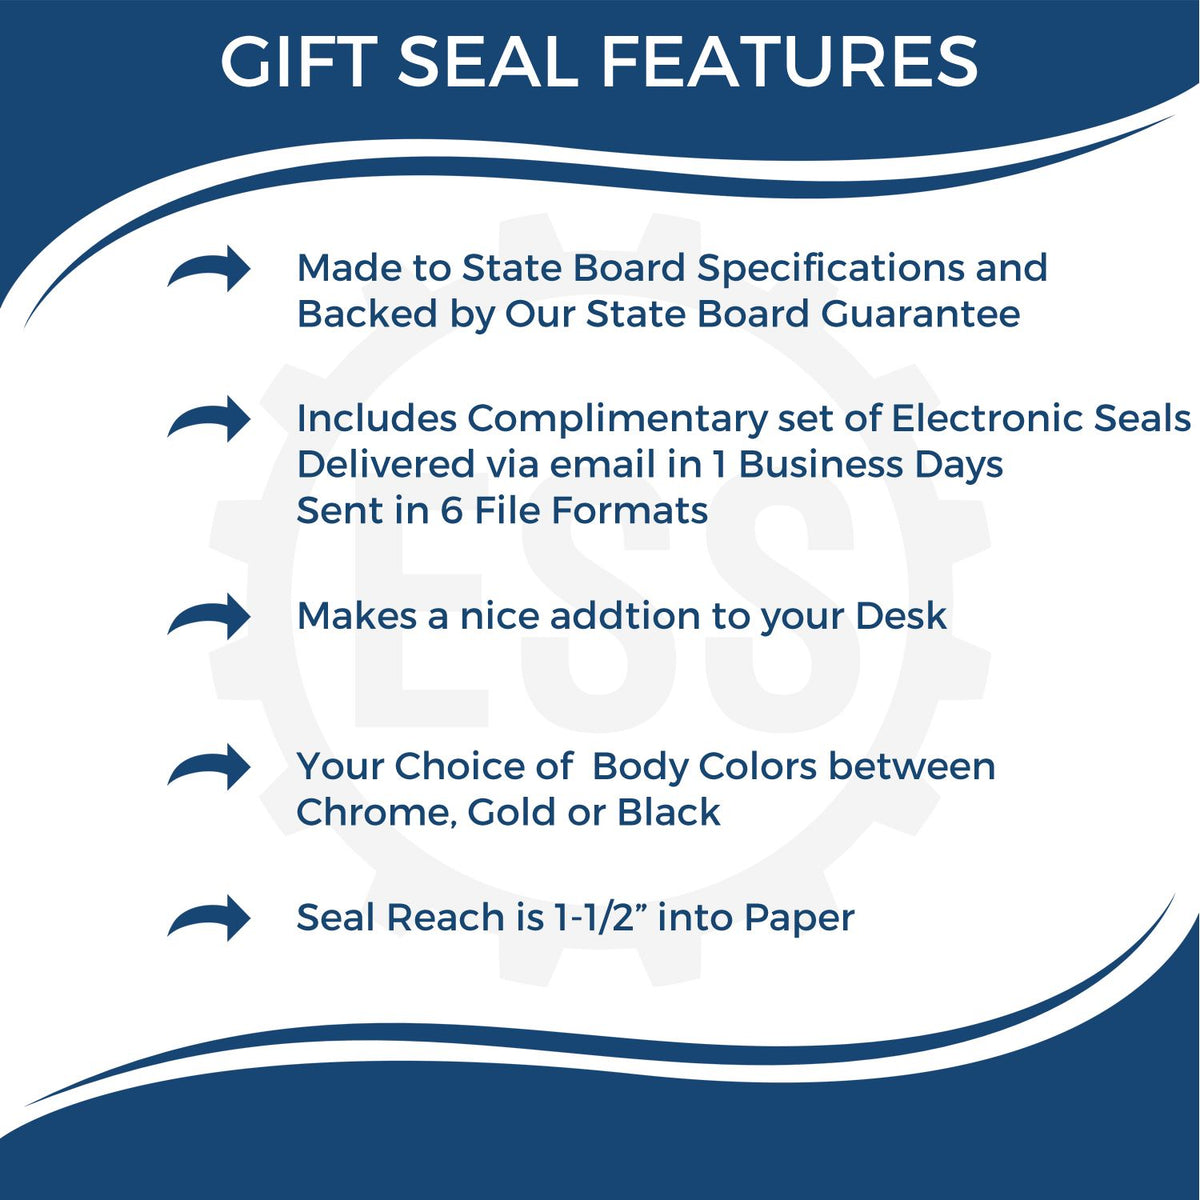 A picture of an infographic highlighting the selling points for the Gift Hawaii Land Surveyor Seal